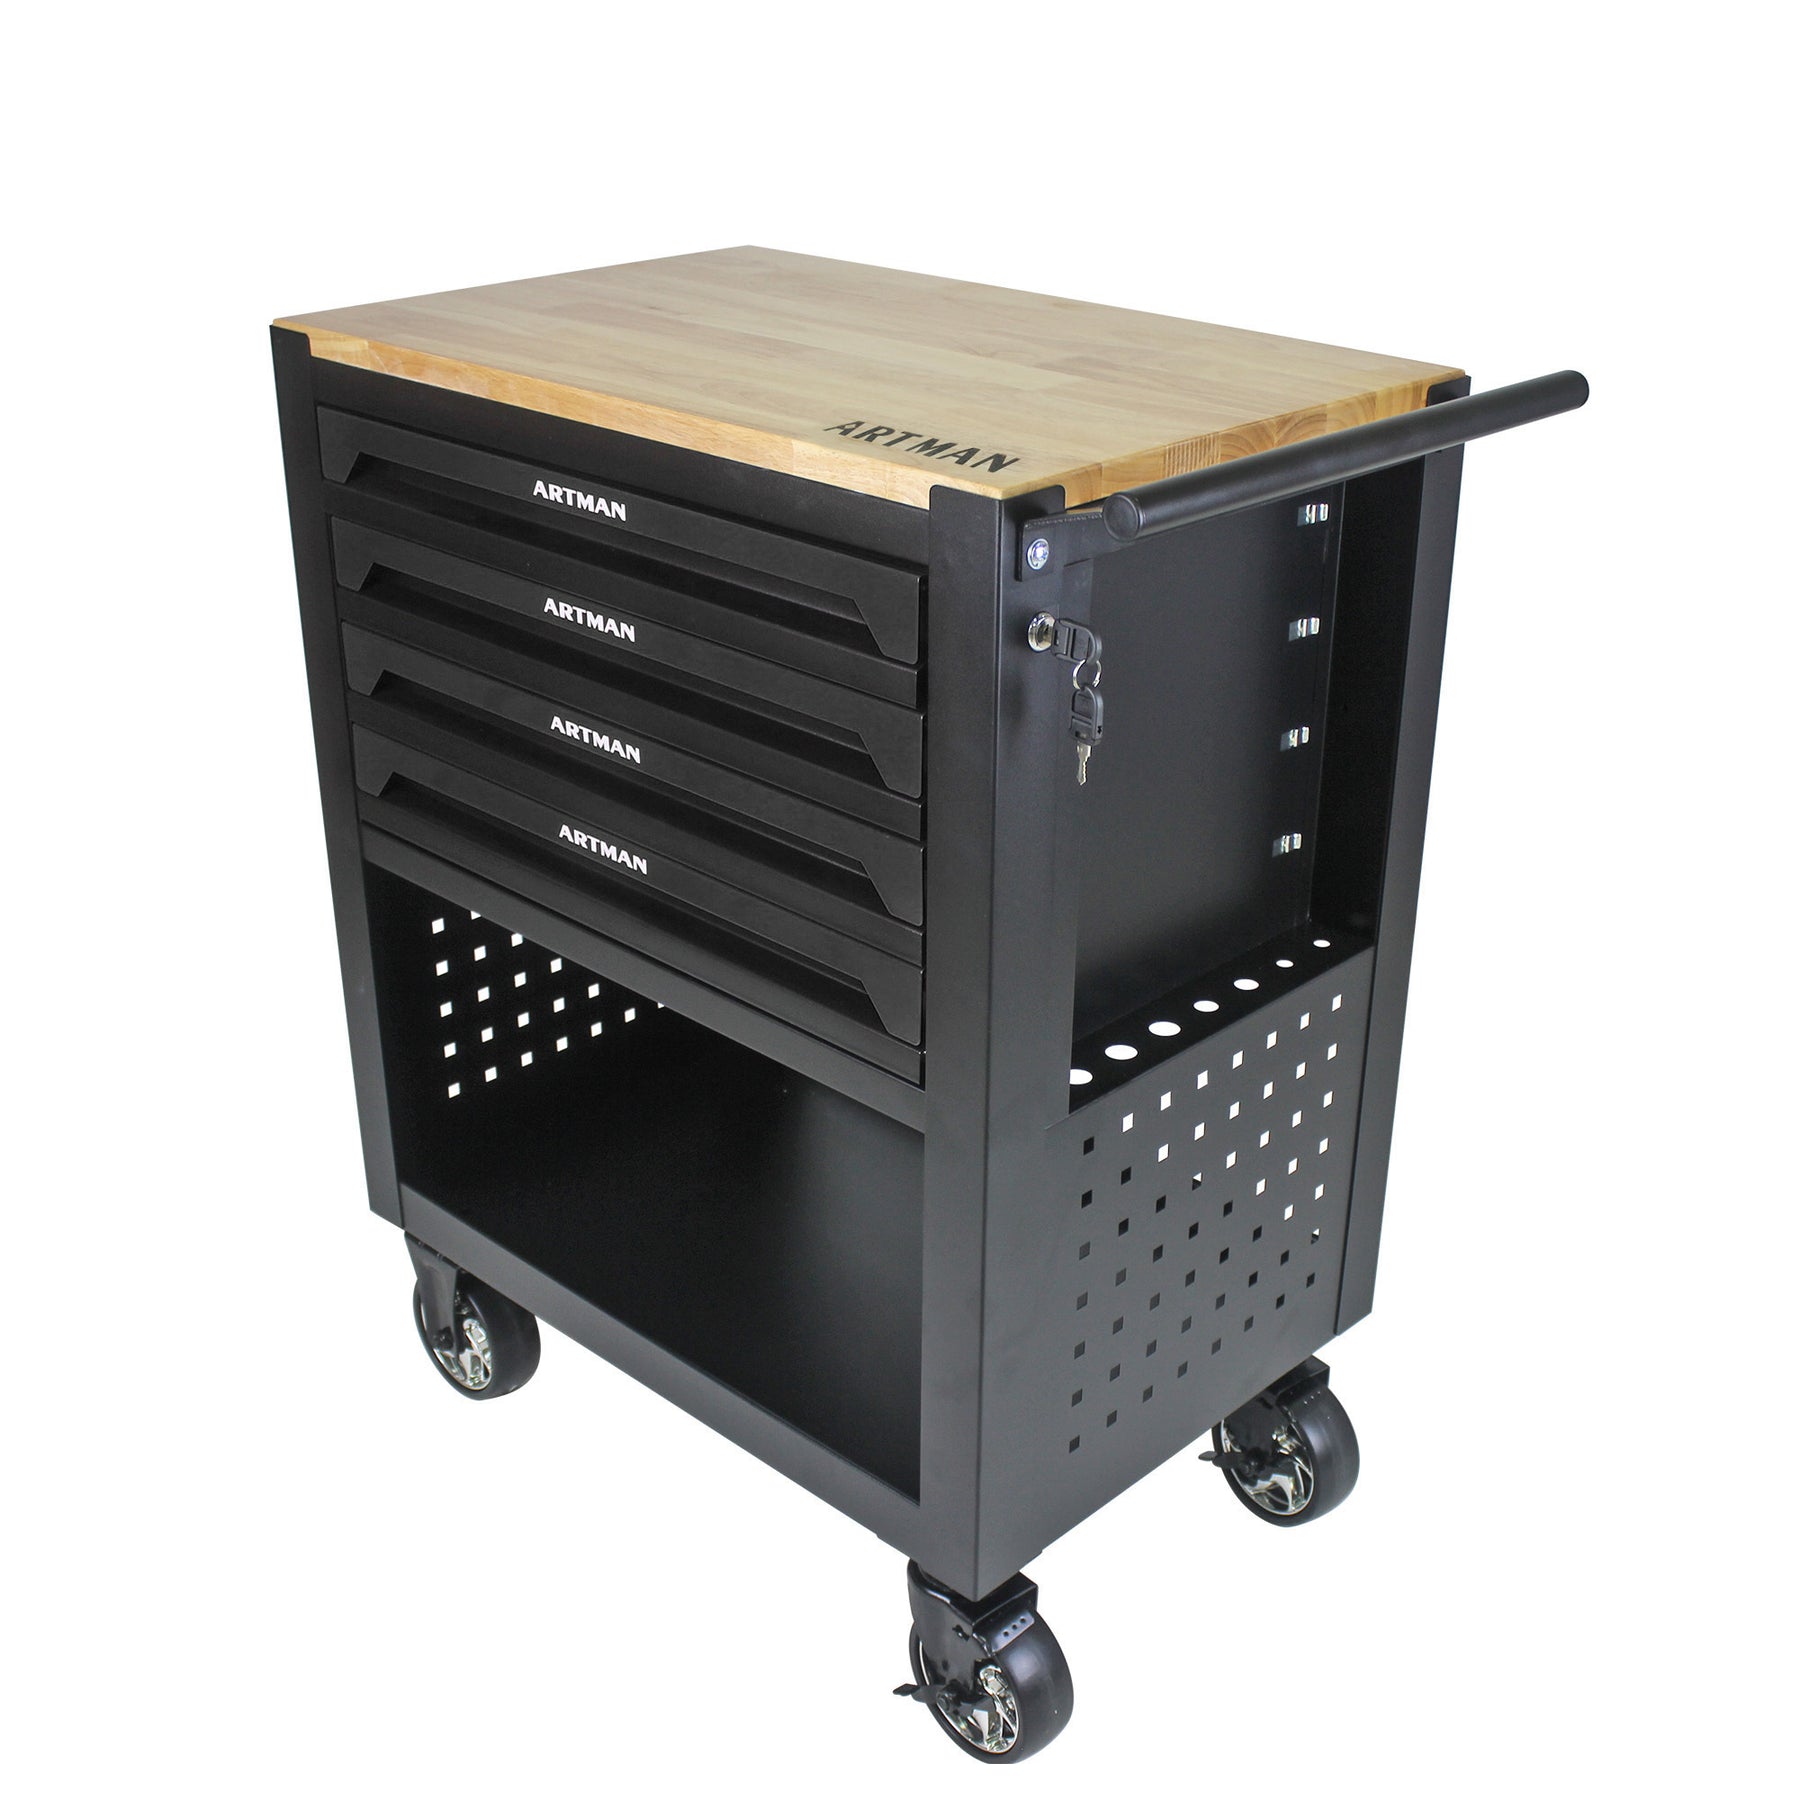 4 DRAWERS MULTIFUNCTIONAL TOOL CART WITH WHEELS AND WOODEN TOP-BLACK - Tonkn